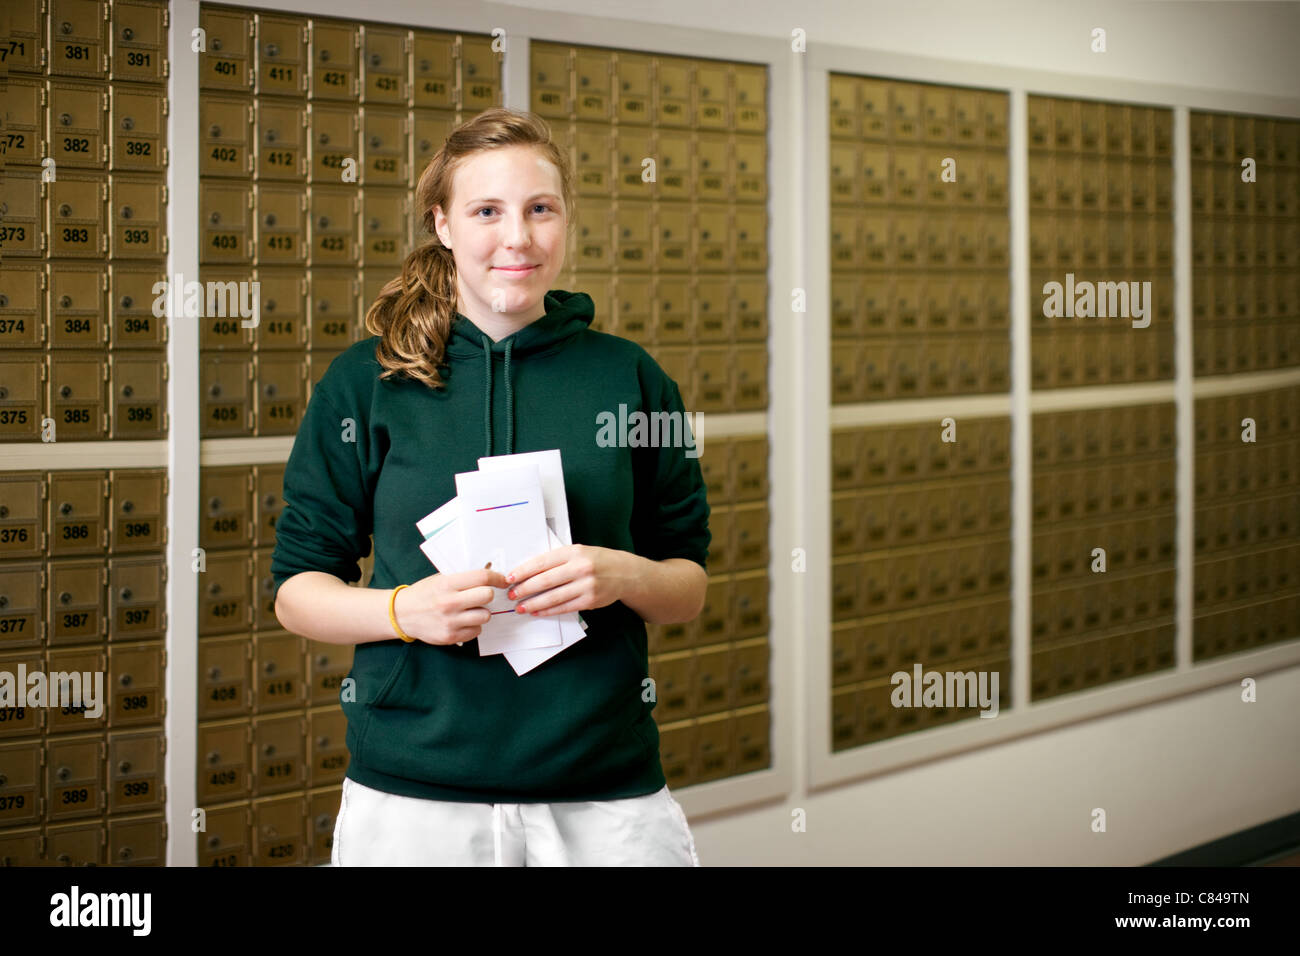 Smiling Caucasian woman holding letters in mailroom Stock Photo